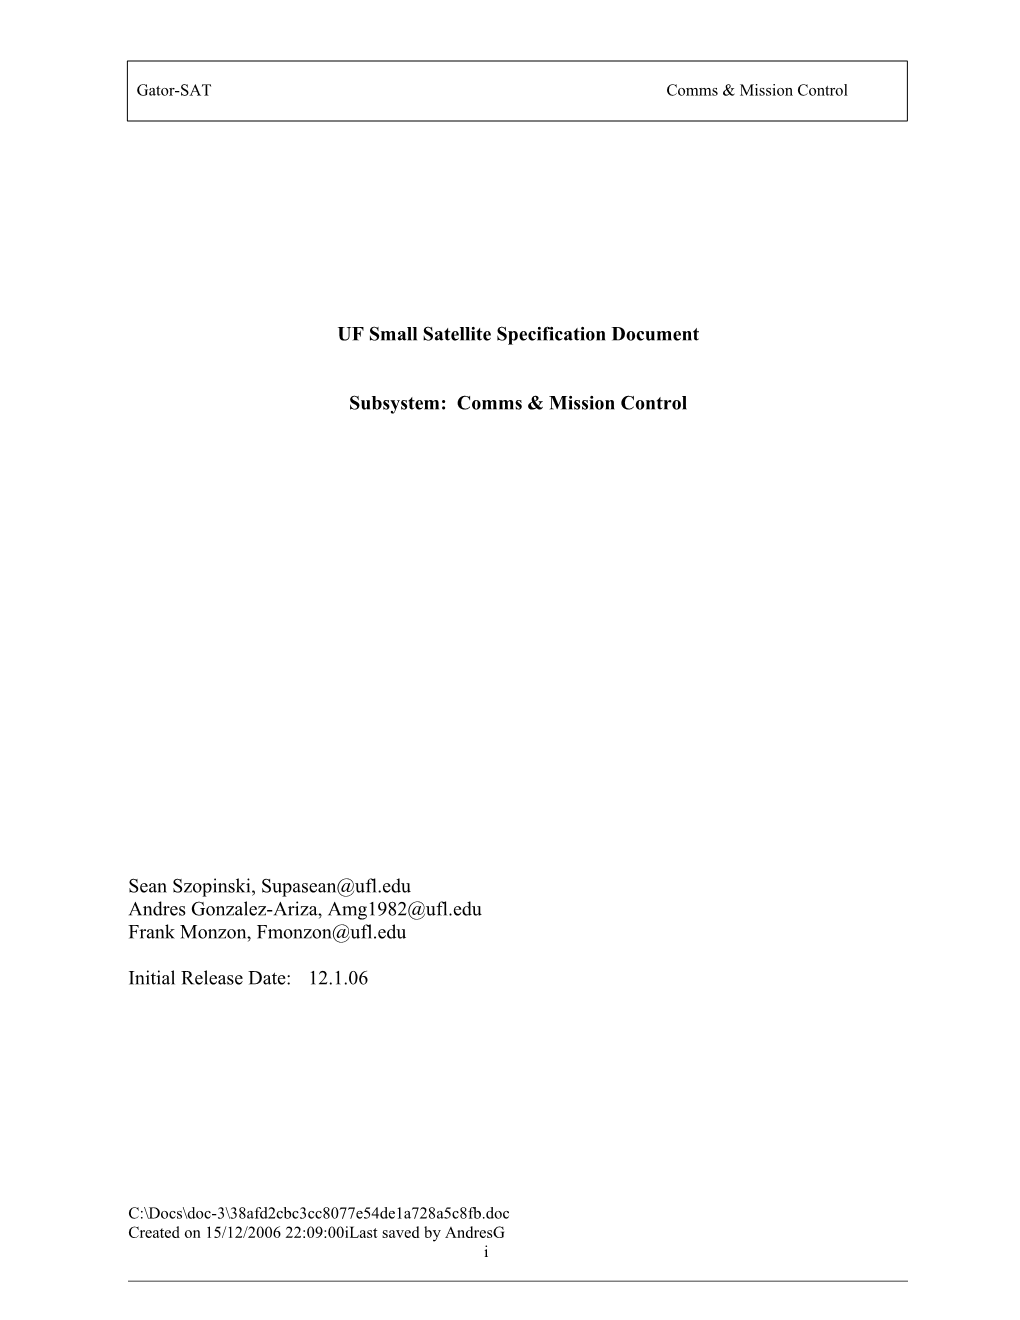 UF Small Satellite Specification Document